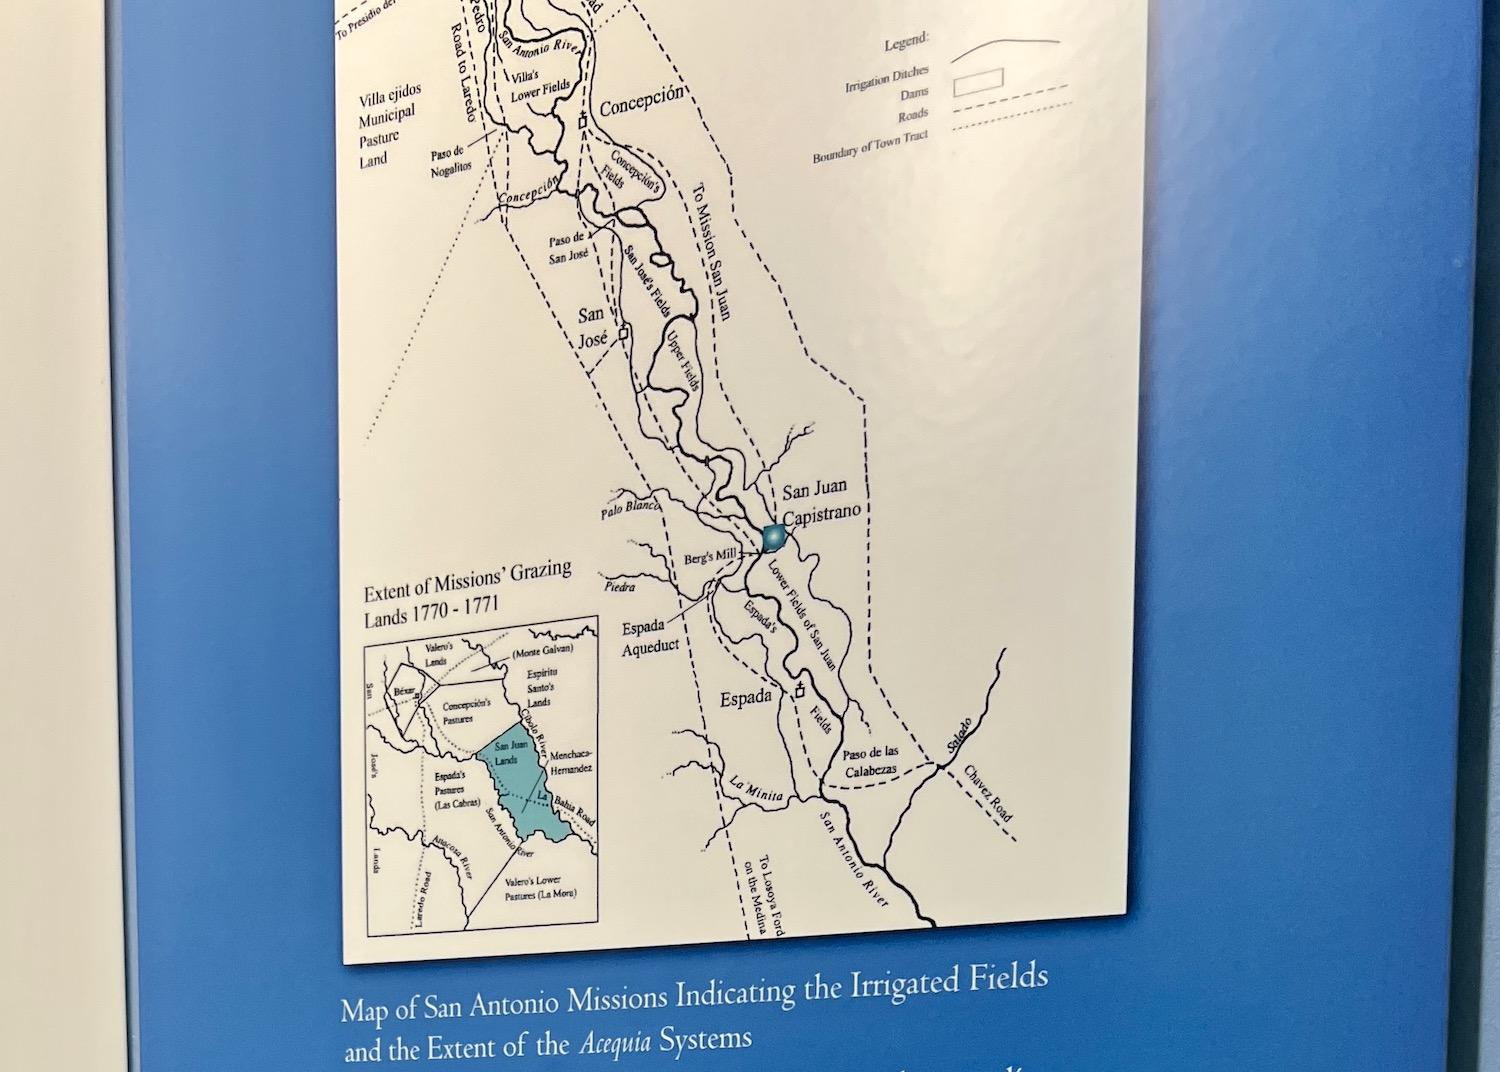 A map helps you visualize the extent of the acequia system that connects the missions.